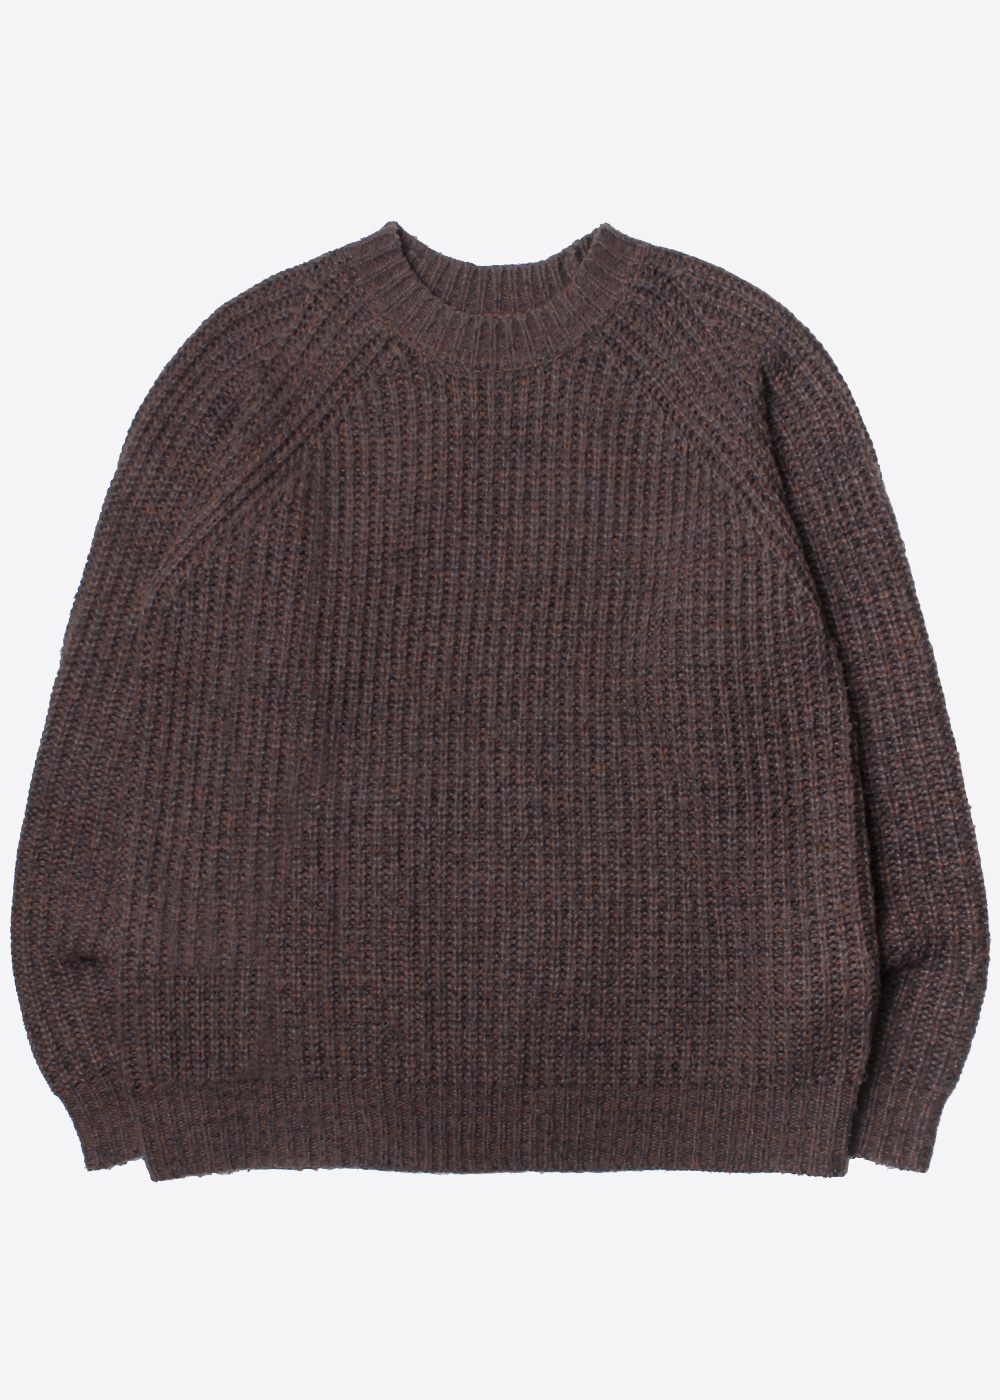 NIKO AND’over fit’ wool knit sweater